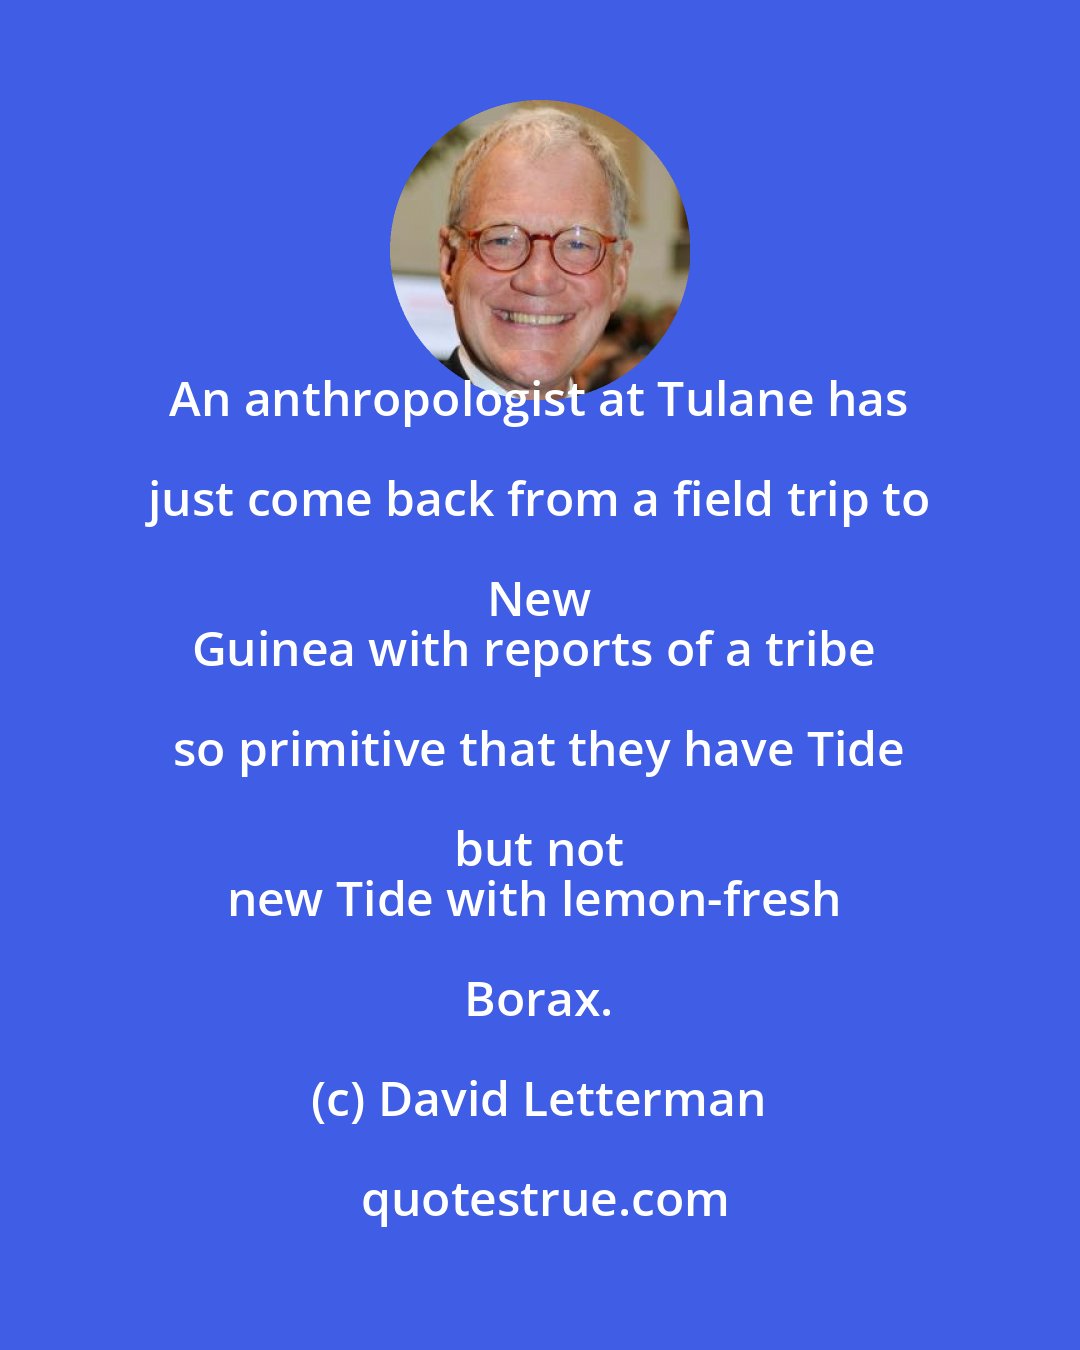 David Letterman: An anthropologist at Tulane has just come back from a field trip to New 
Guinea with reports of a tribe so primitive that they have Tide but not 
new Tide with lemon-fresh Borax.